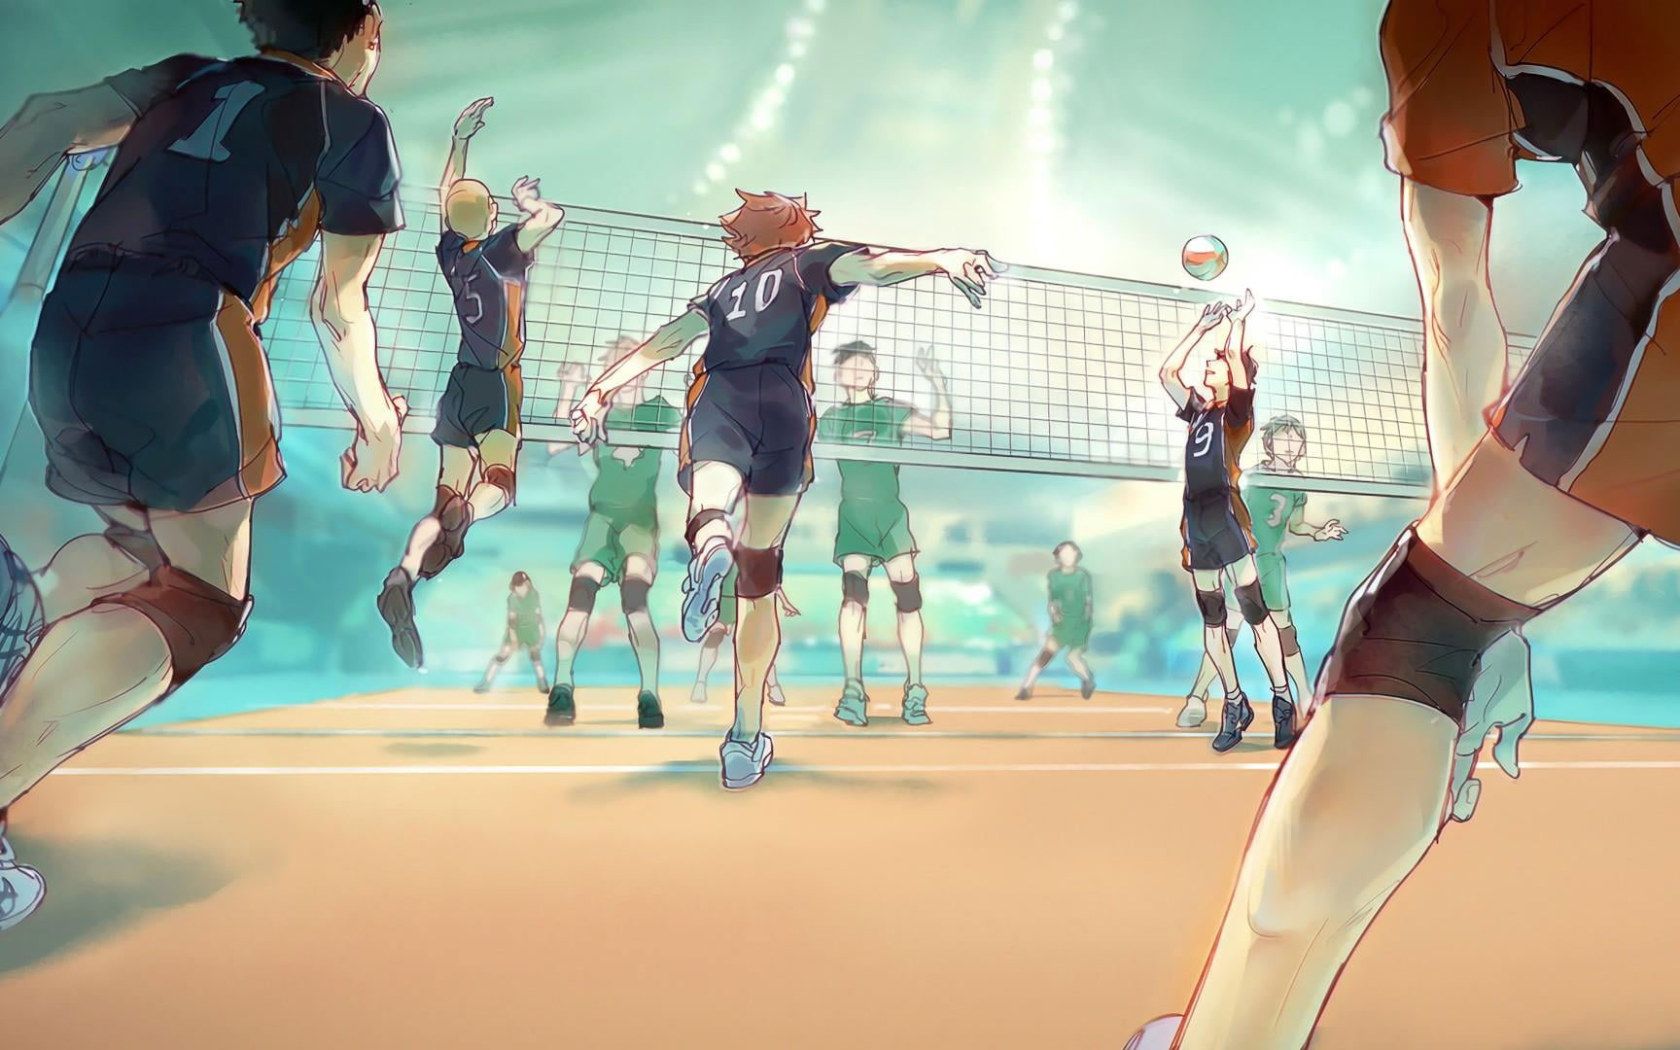 A group of people playing volleyball on the court - Volleyball